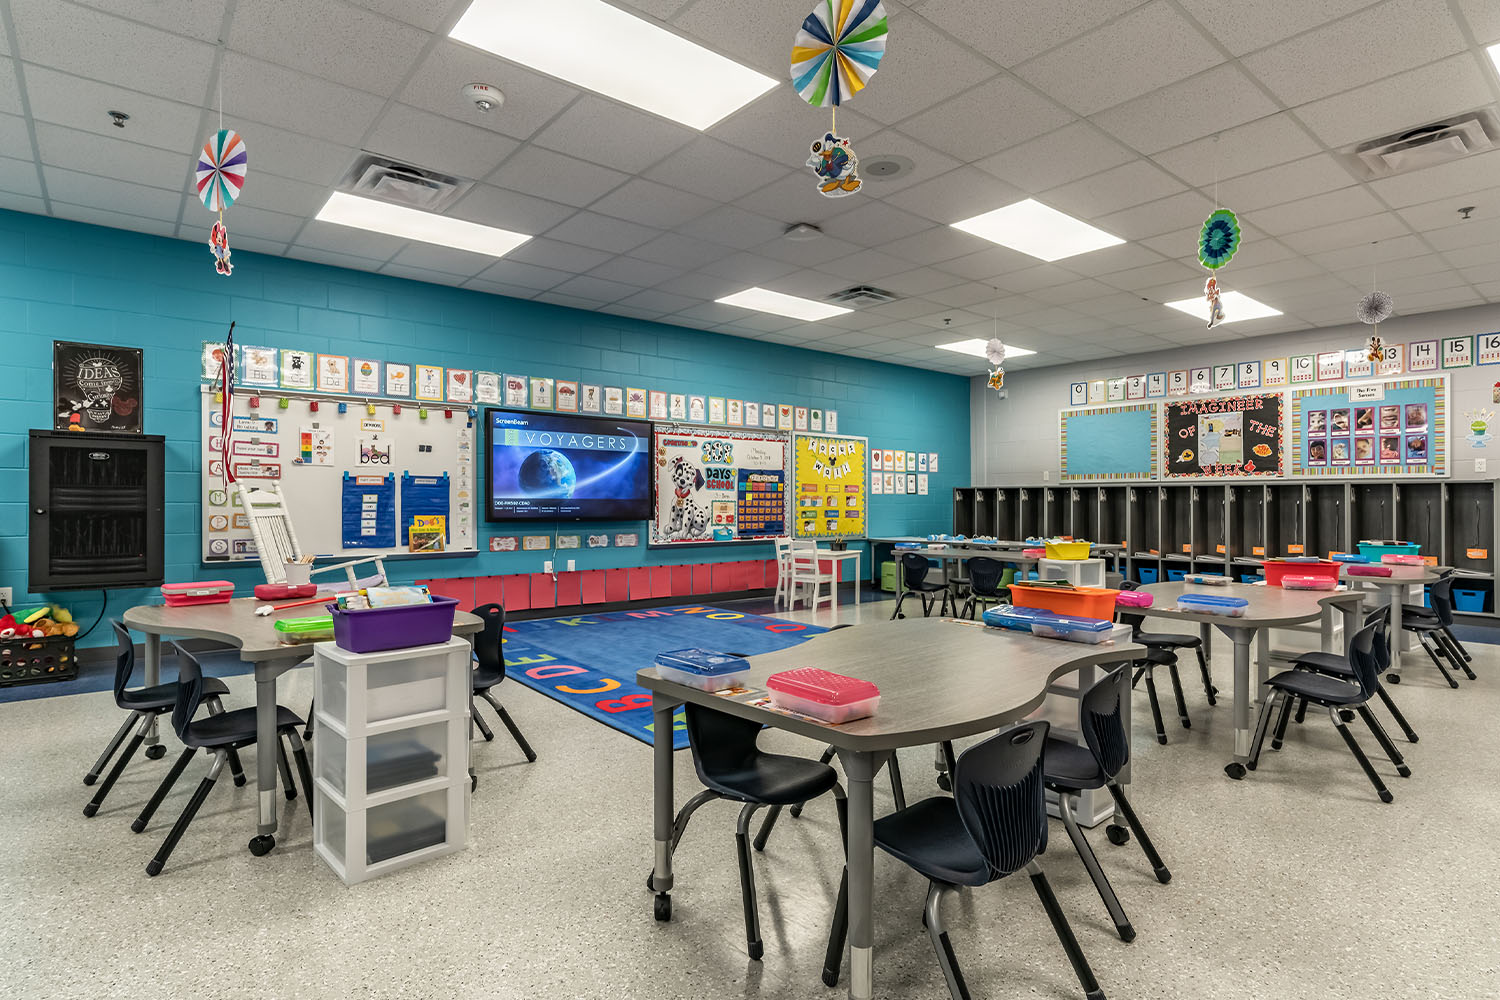 Colorful elementary school classroom with desks, chairs, wall-mounted T.V. and student cubbies